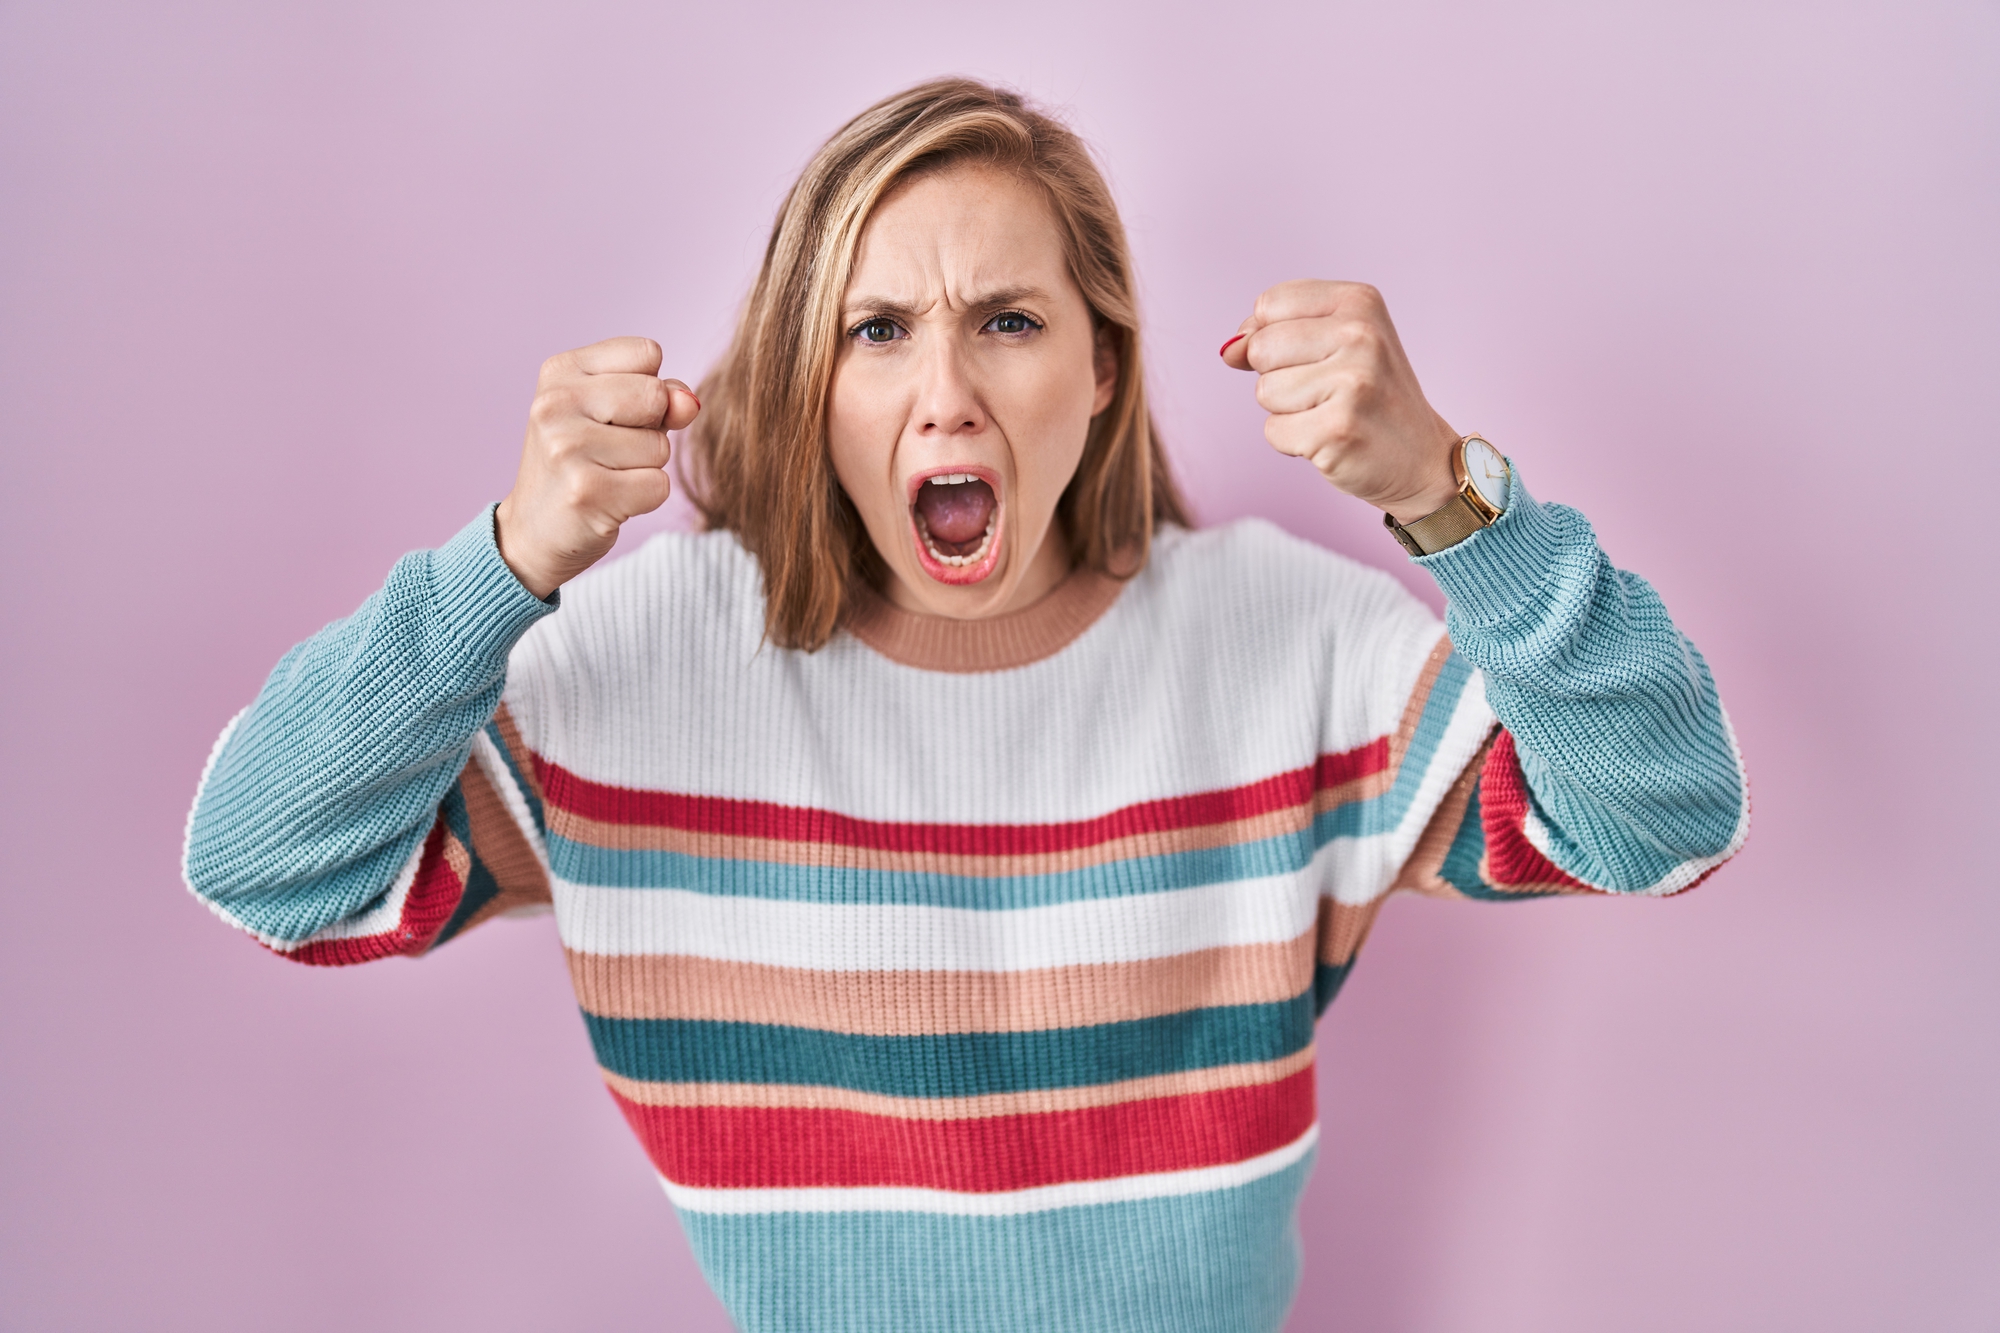 A woman with shoulder-length blonde hair is standing against a light pink background. She is wearing a colorful striped sweater and a watch on her wrist. She looks angry, with her mouth open and fists raised.